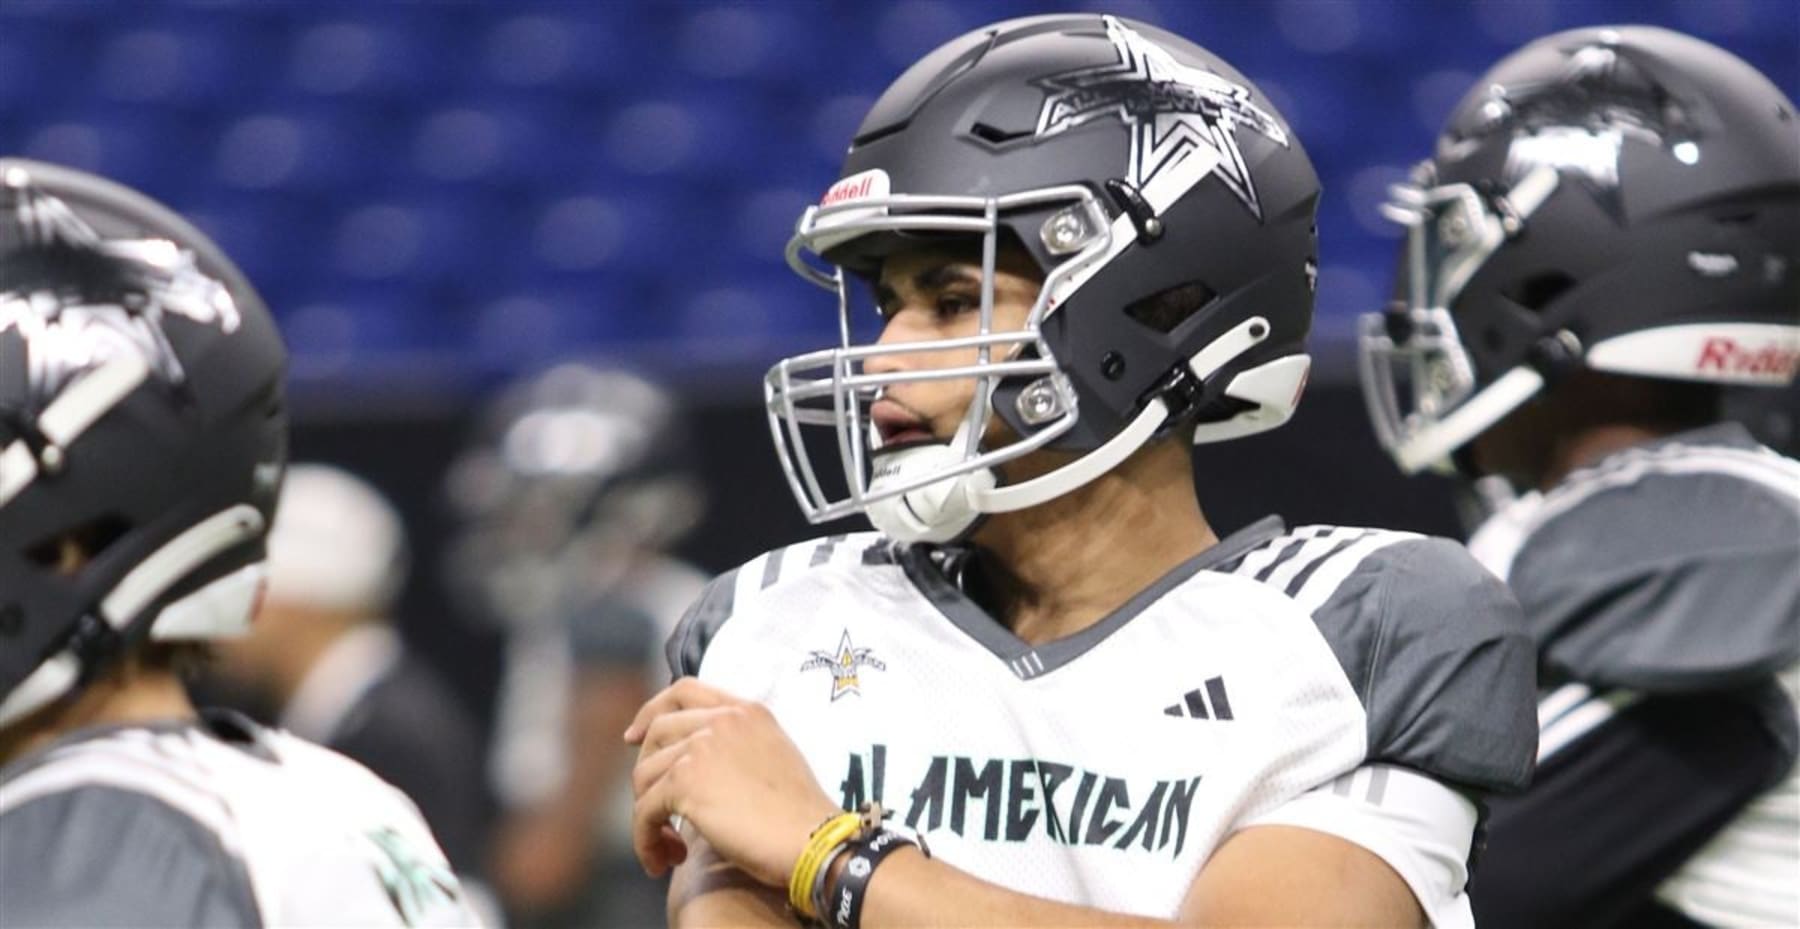 All American Bowl  College Football: News, Videos, Stats, Highlights,  Results & More - NBC Sports